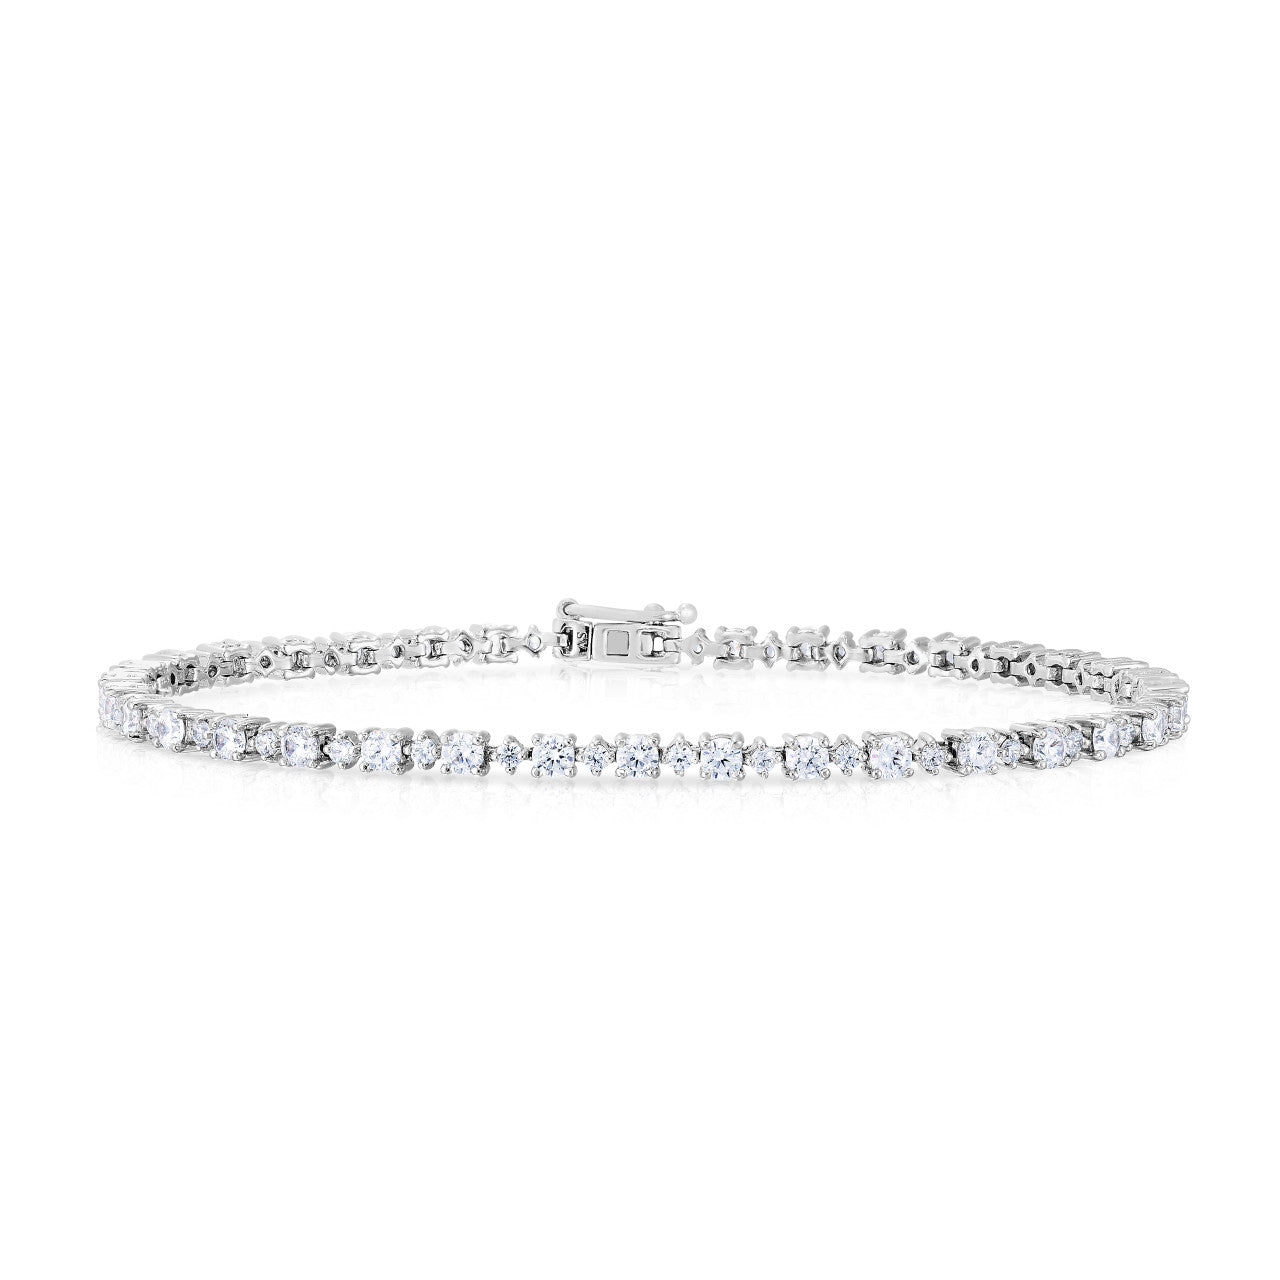 Every Other Round Diamond Tennis Bracelet in White Gold